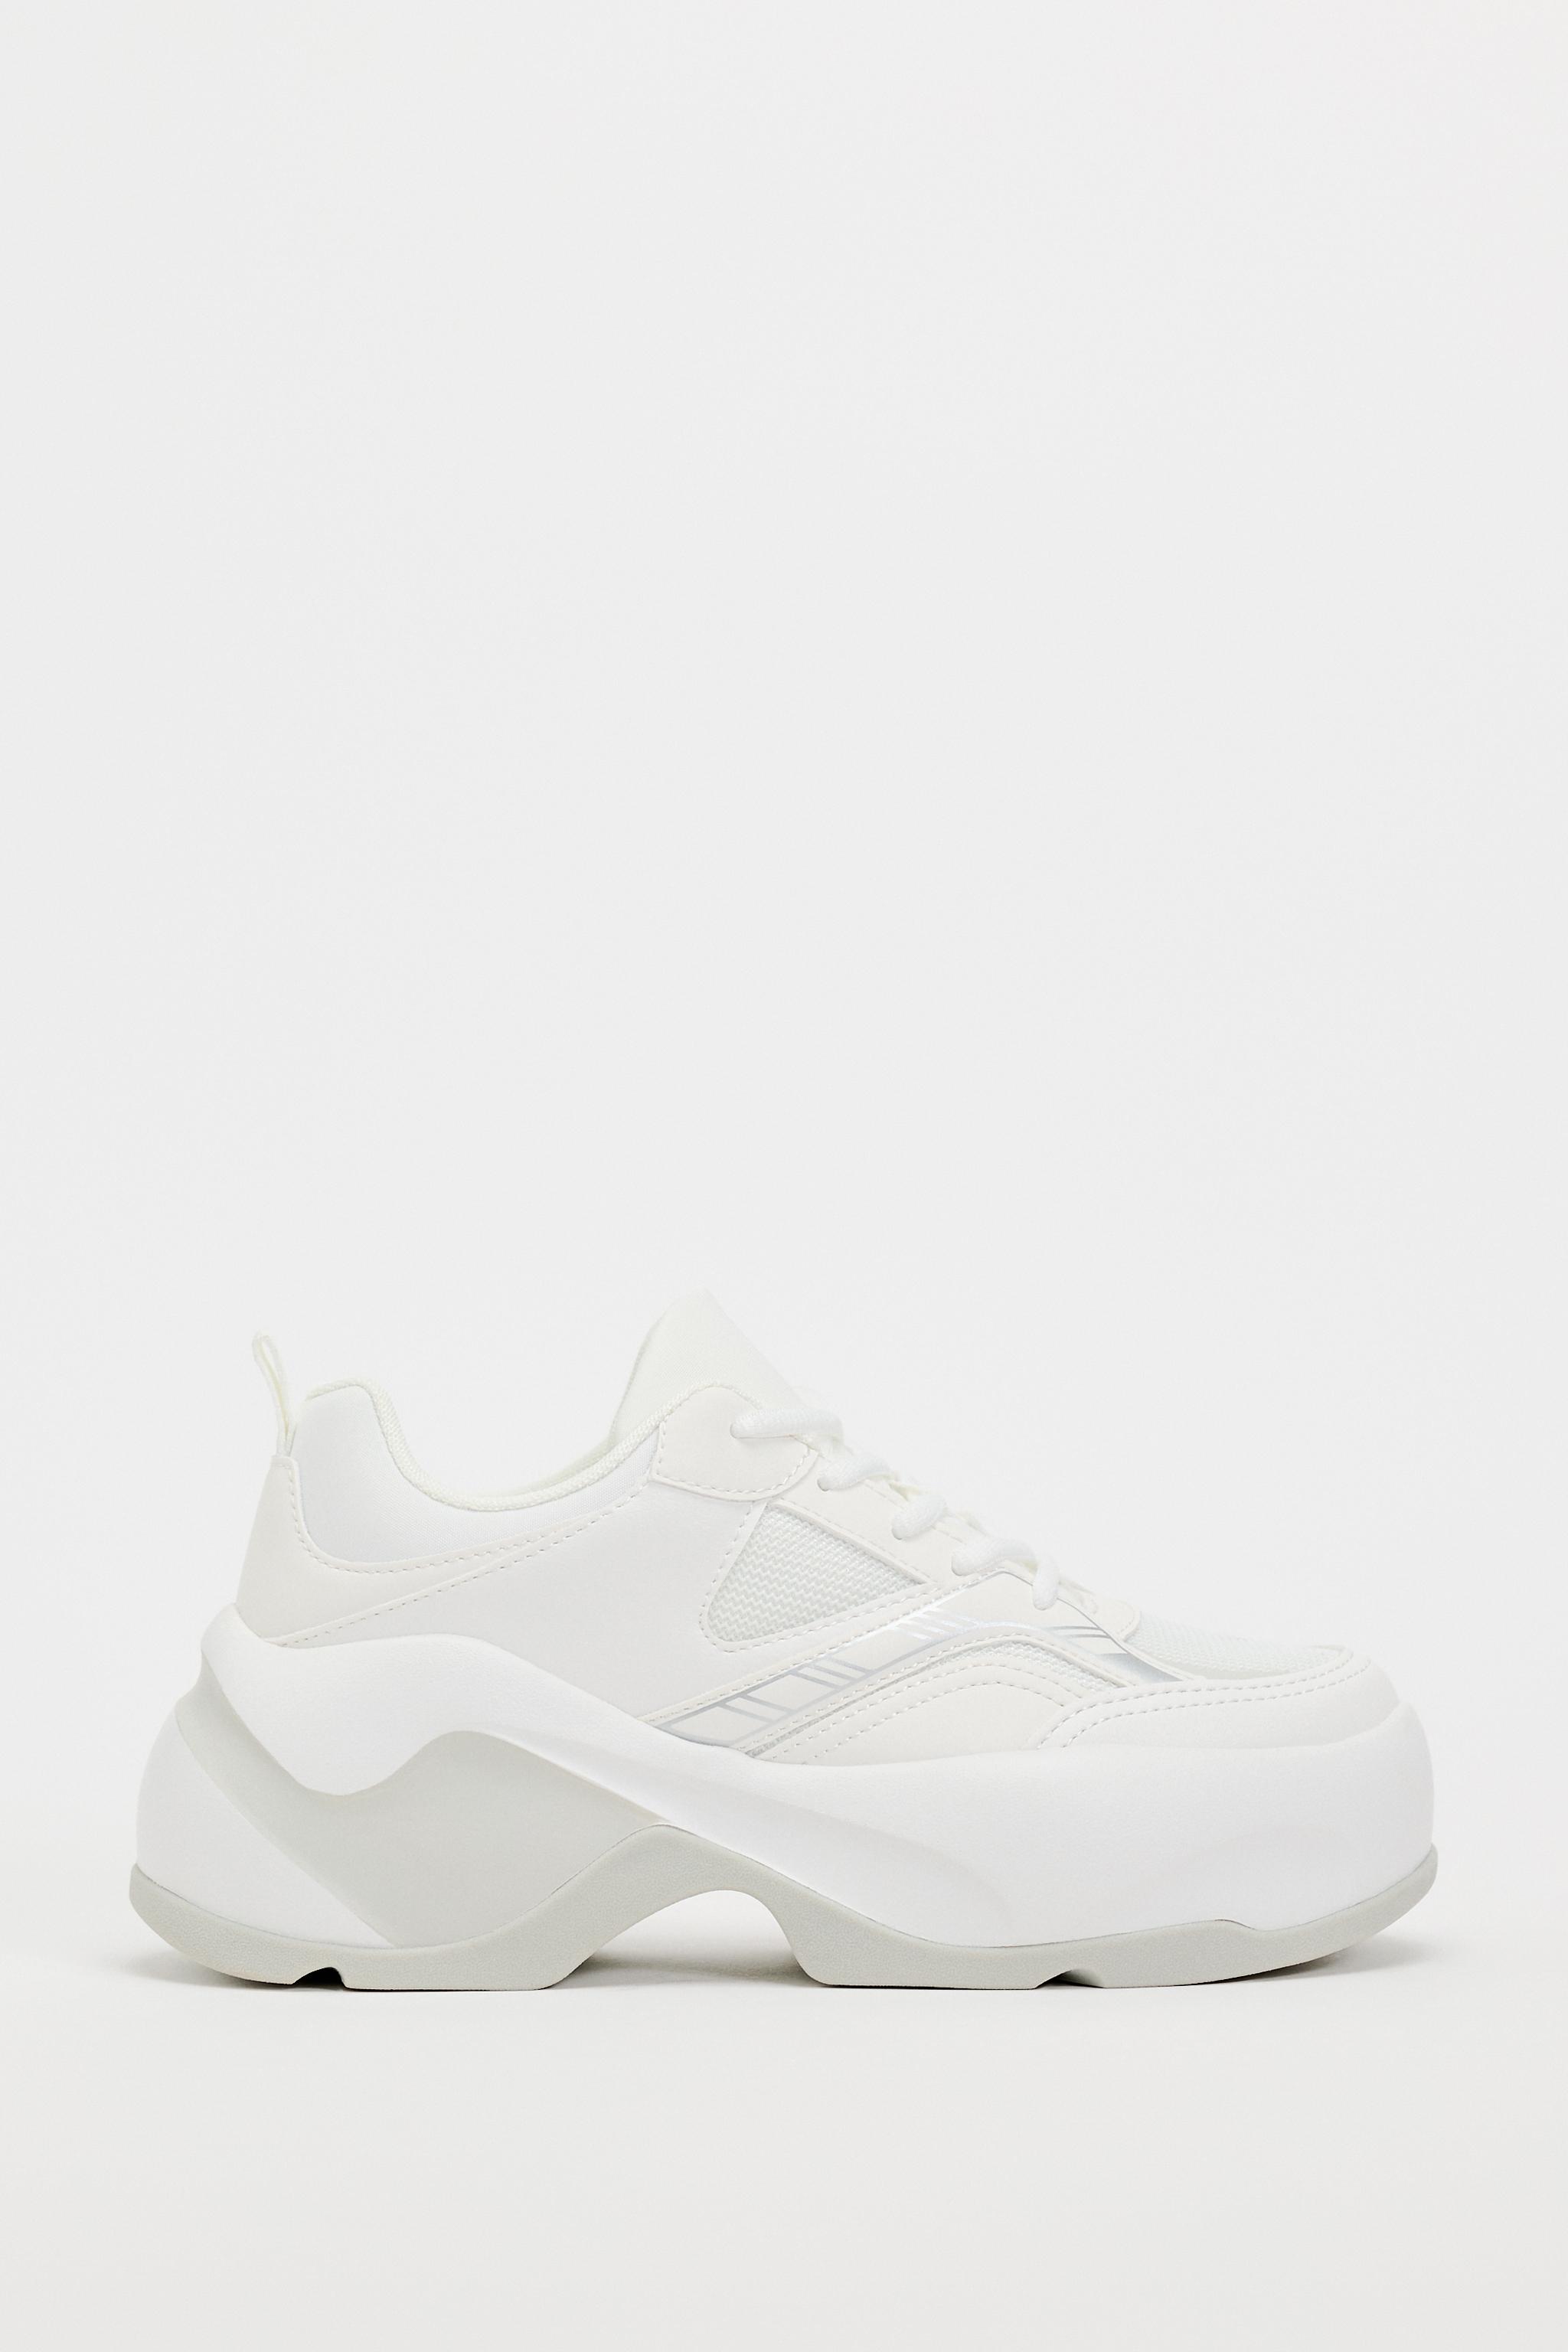 SOCK-STYLE SNEAKERS WITH AIR CUSHION SOLE, ZARA Poland